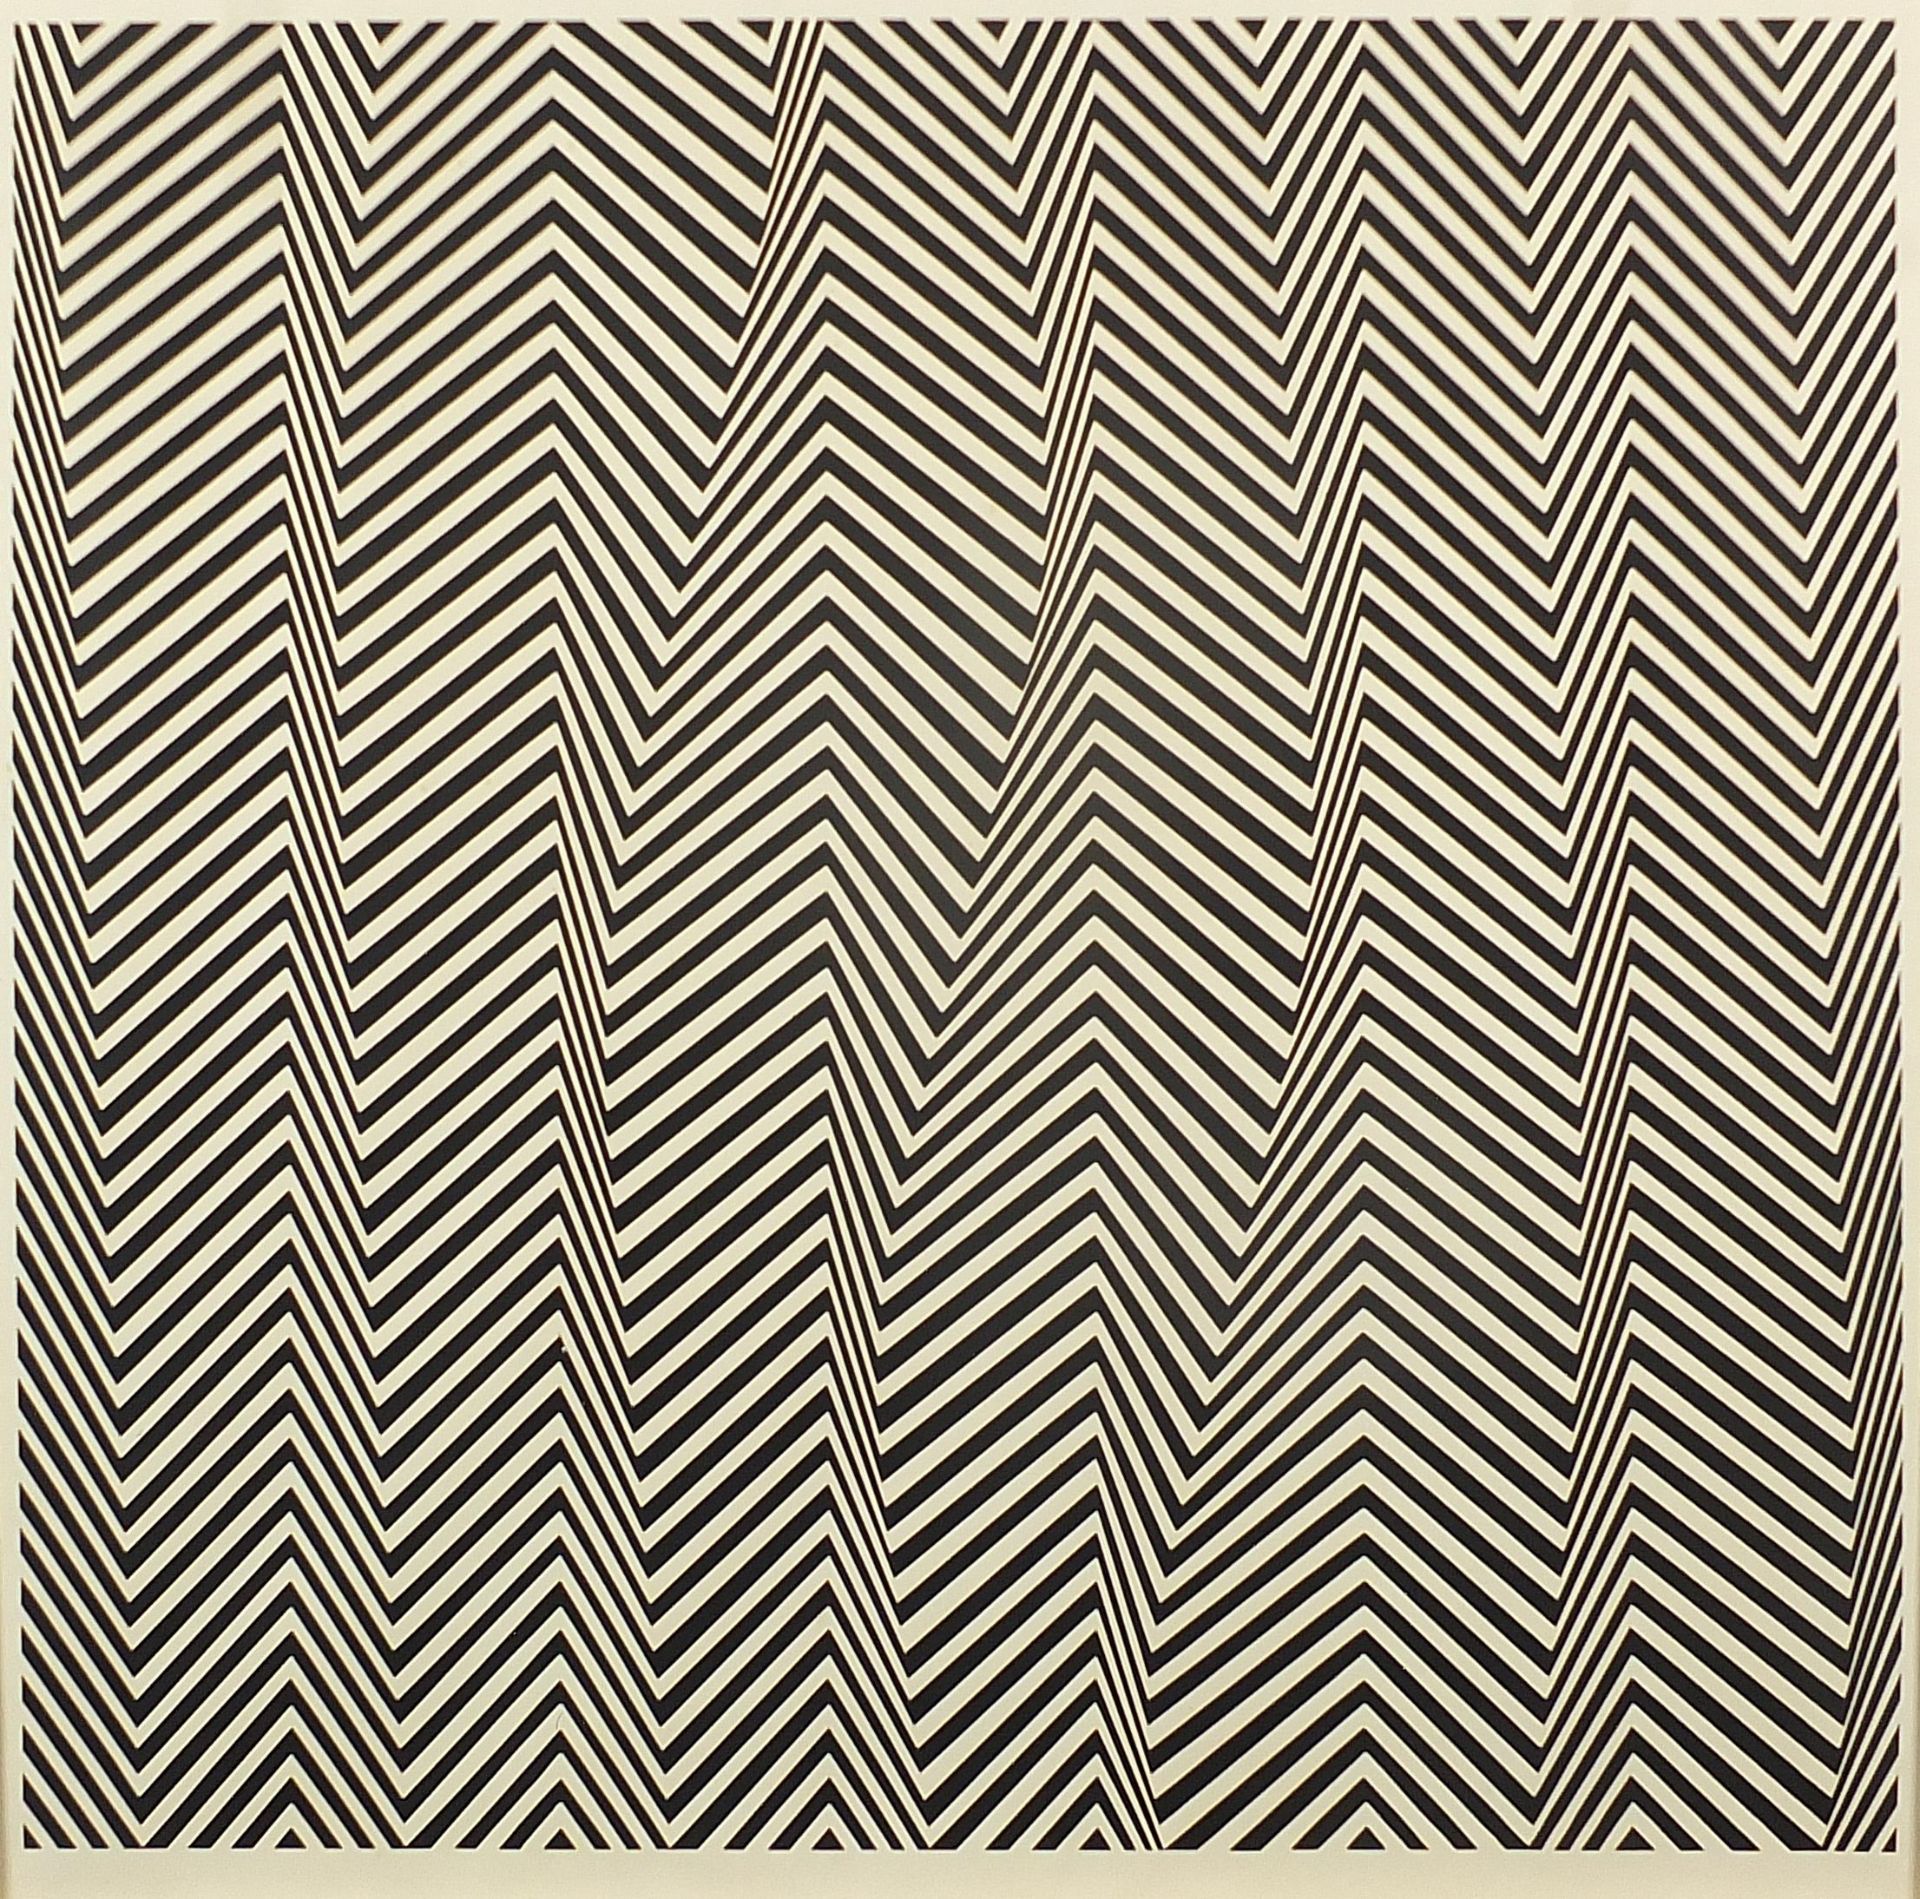 Bridget Riley - Poster Poem Ascending, 1960s screen print published by Alecto Editions 1967, mounte